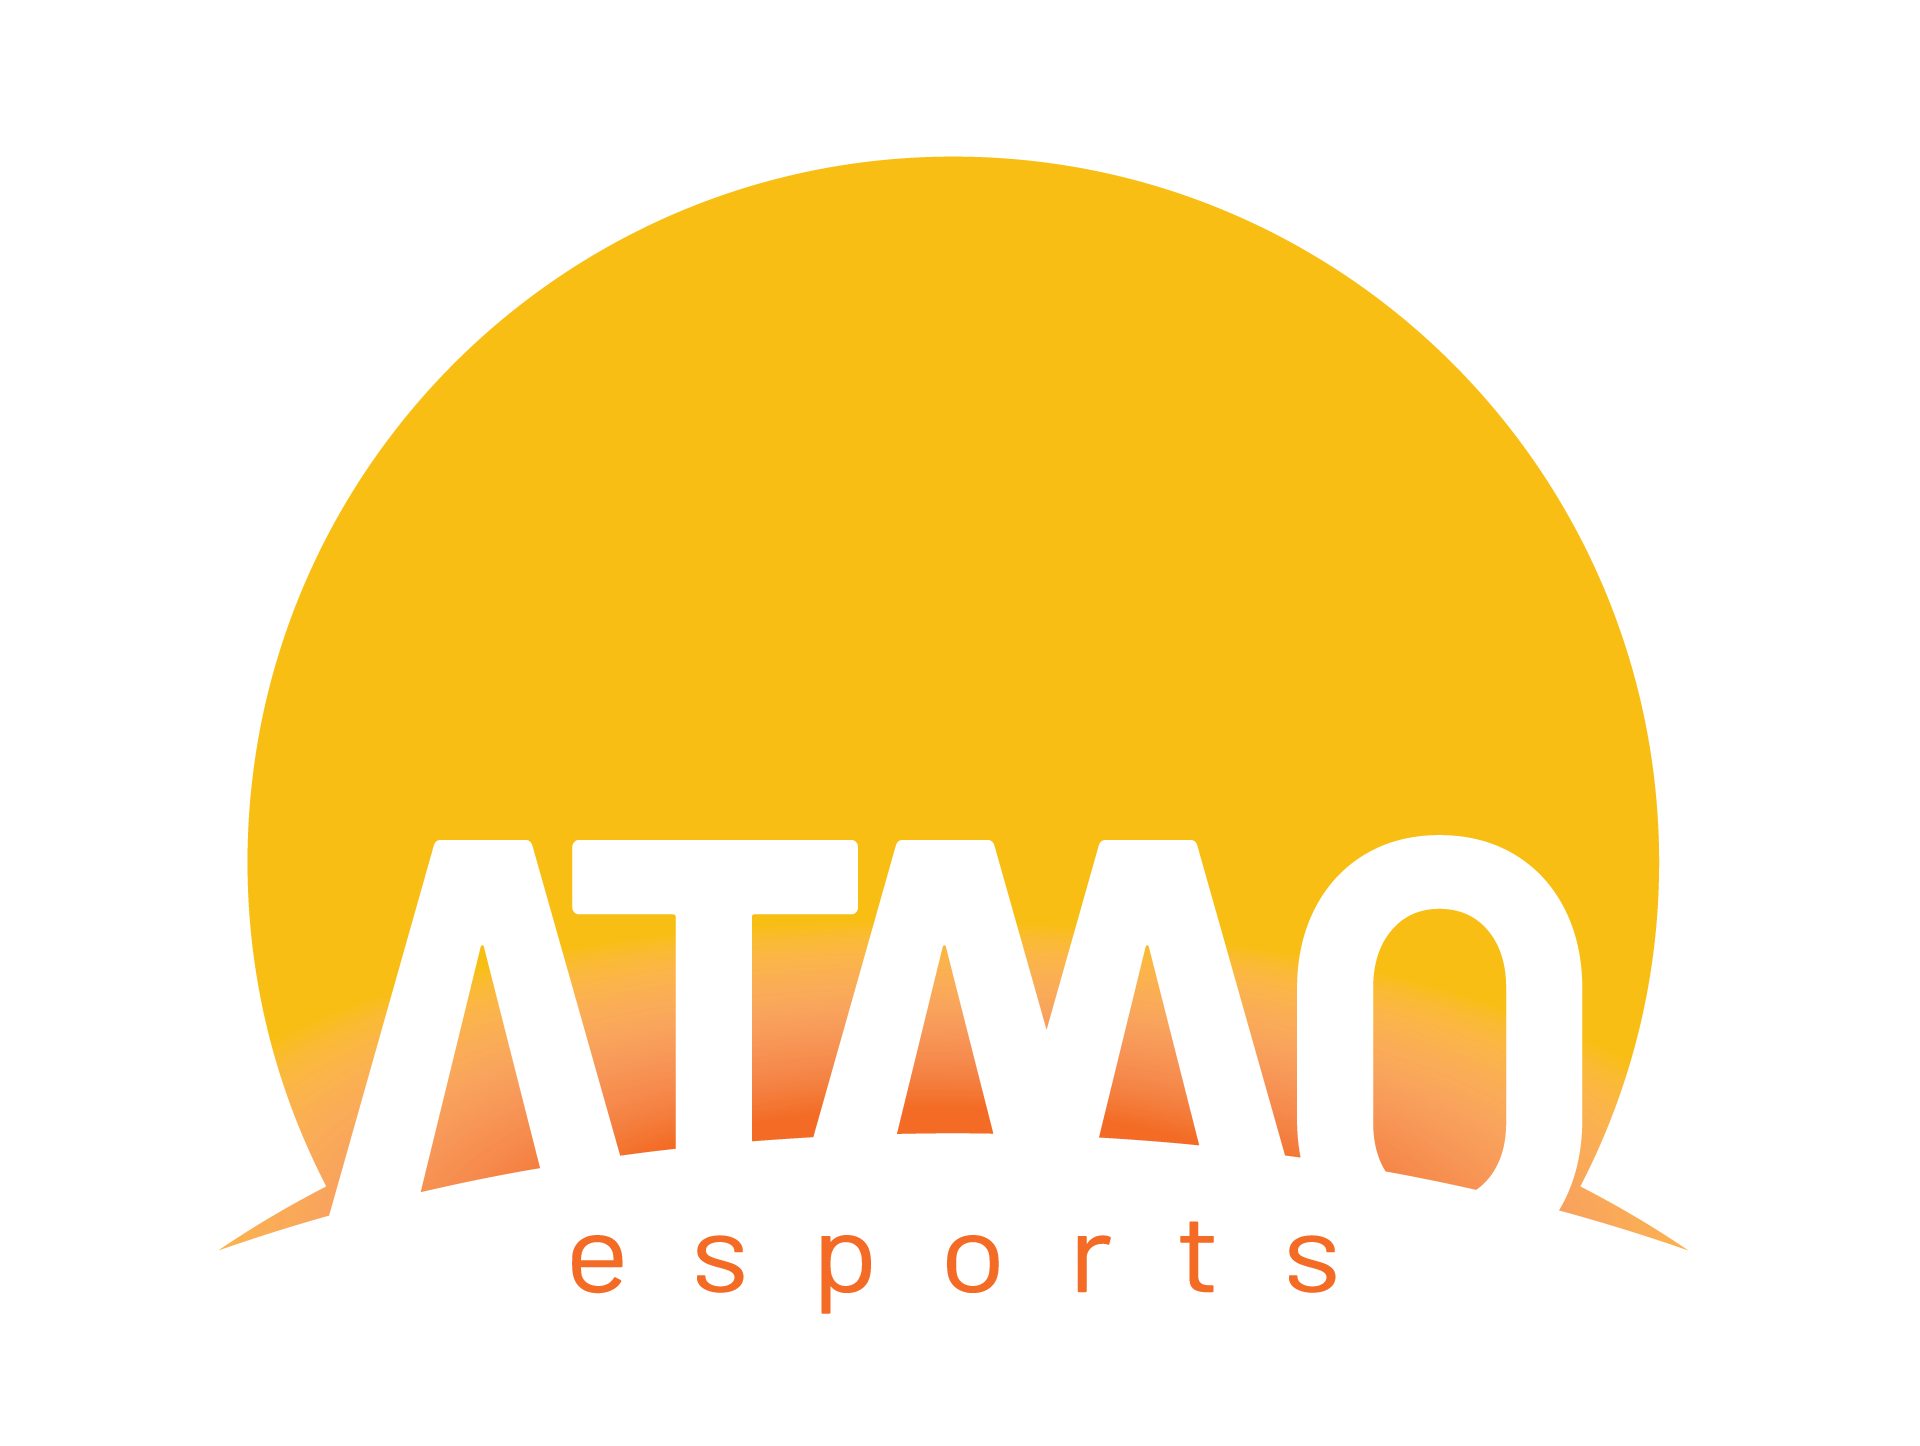 You are currently viewing ATMO esports Logo